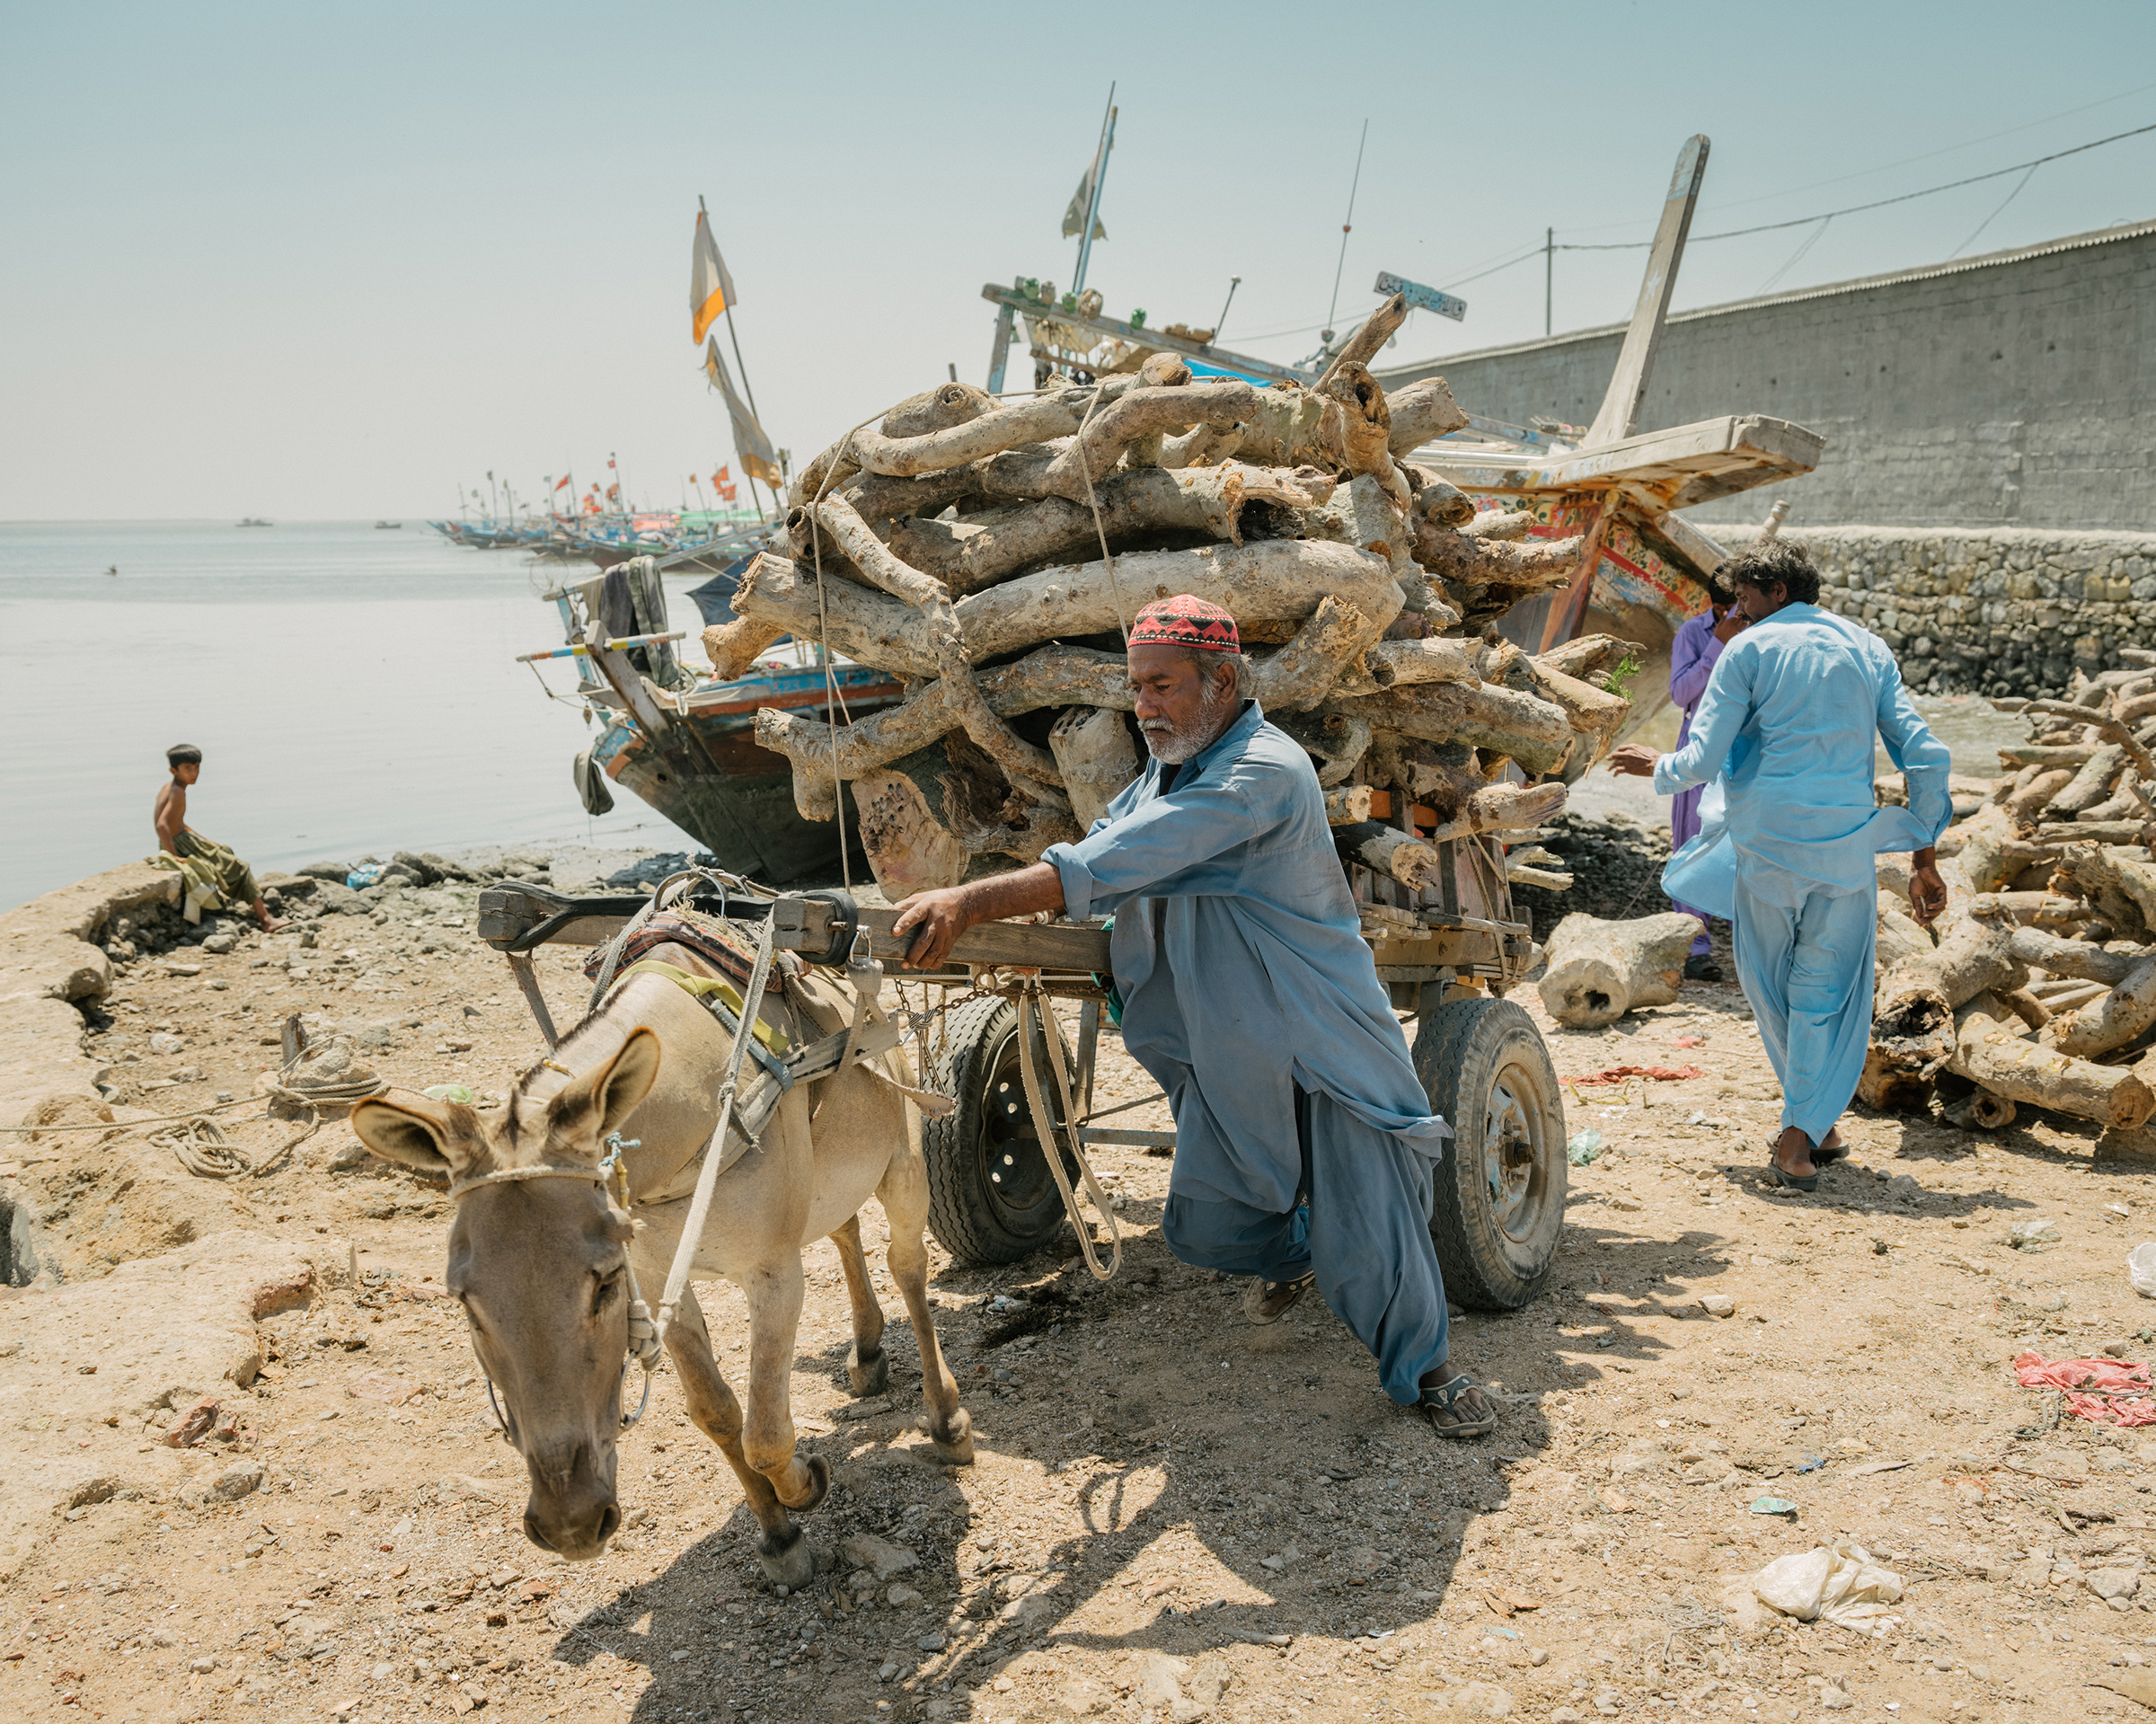 Mangrove wood, cut from Bundal Island, is loaded onto a donkey cart in Ibrahim Hyderi, on the outskirts of Karachi. The timber will likely be sold for use as fuel or as construction materials in poor areas of the city (Matthieu Paley for TIME)